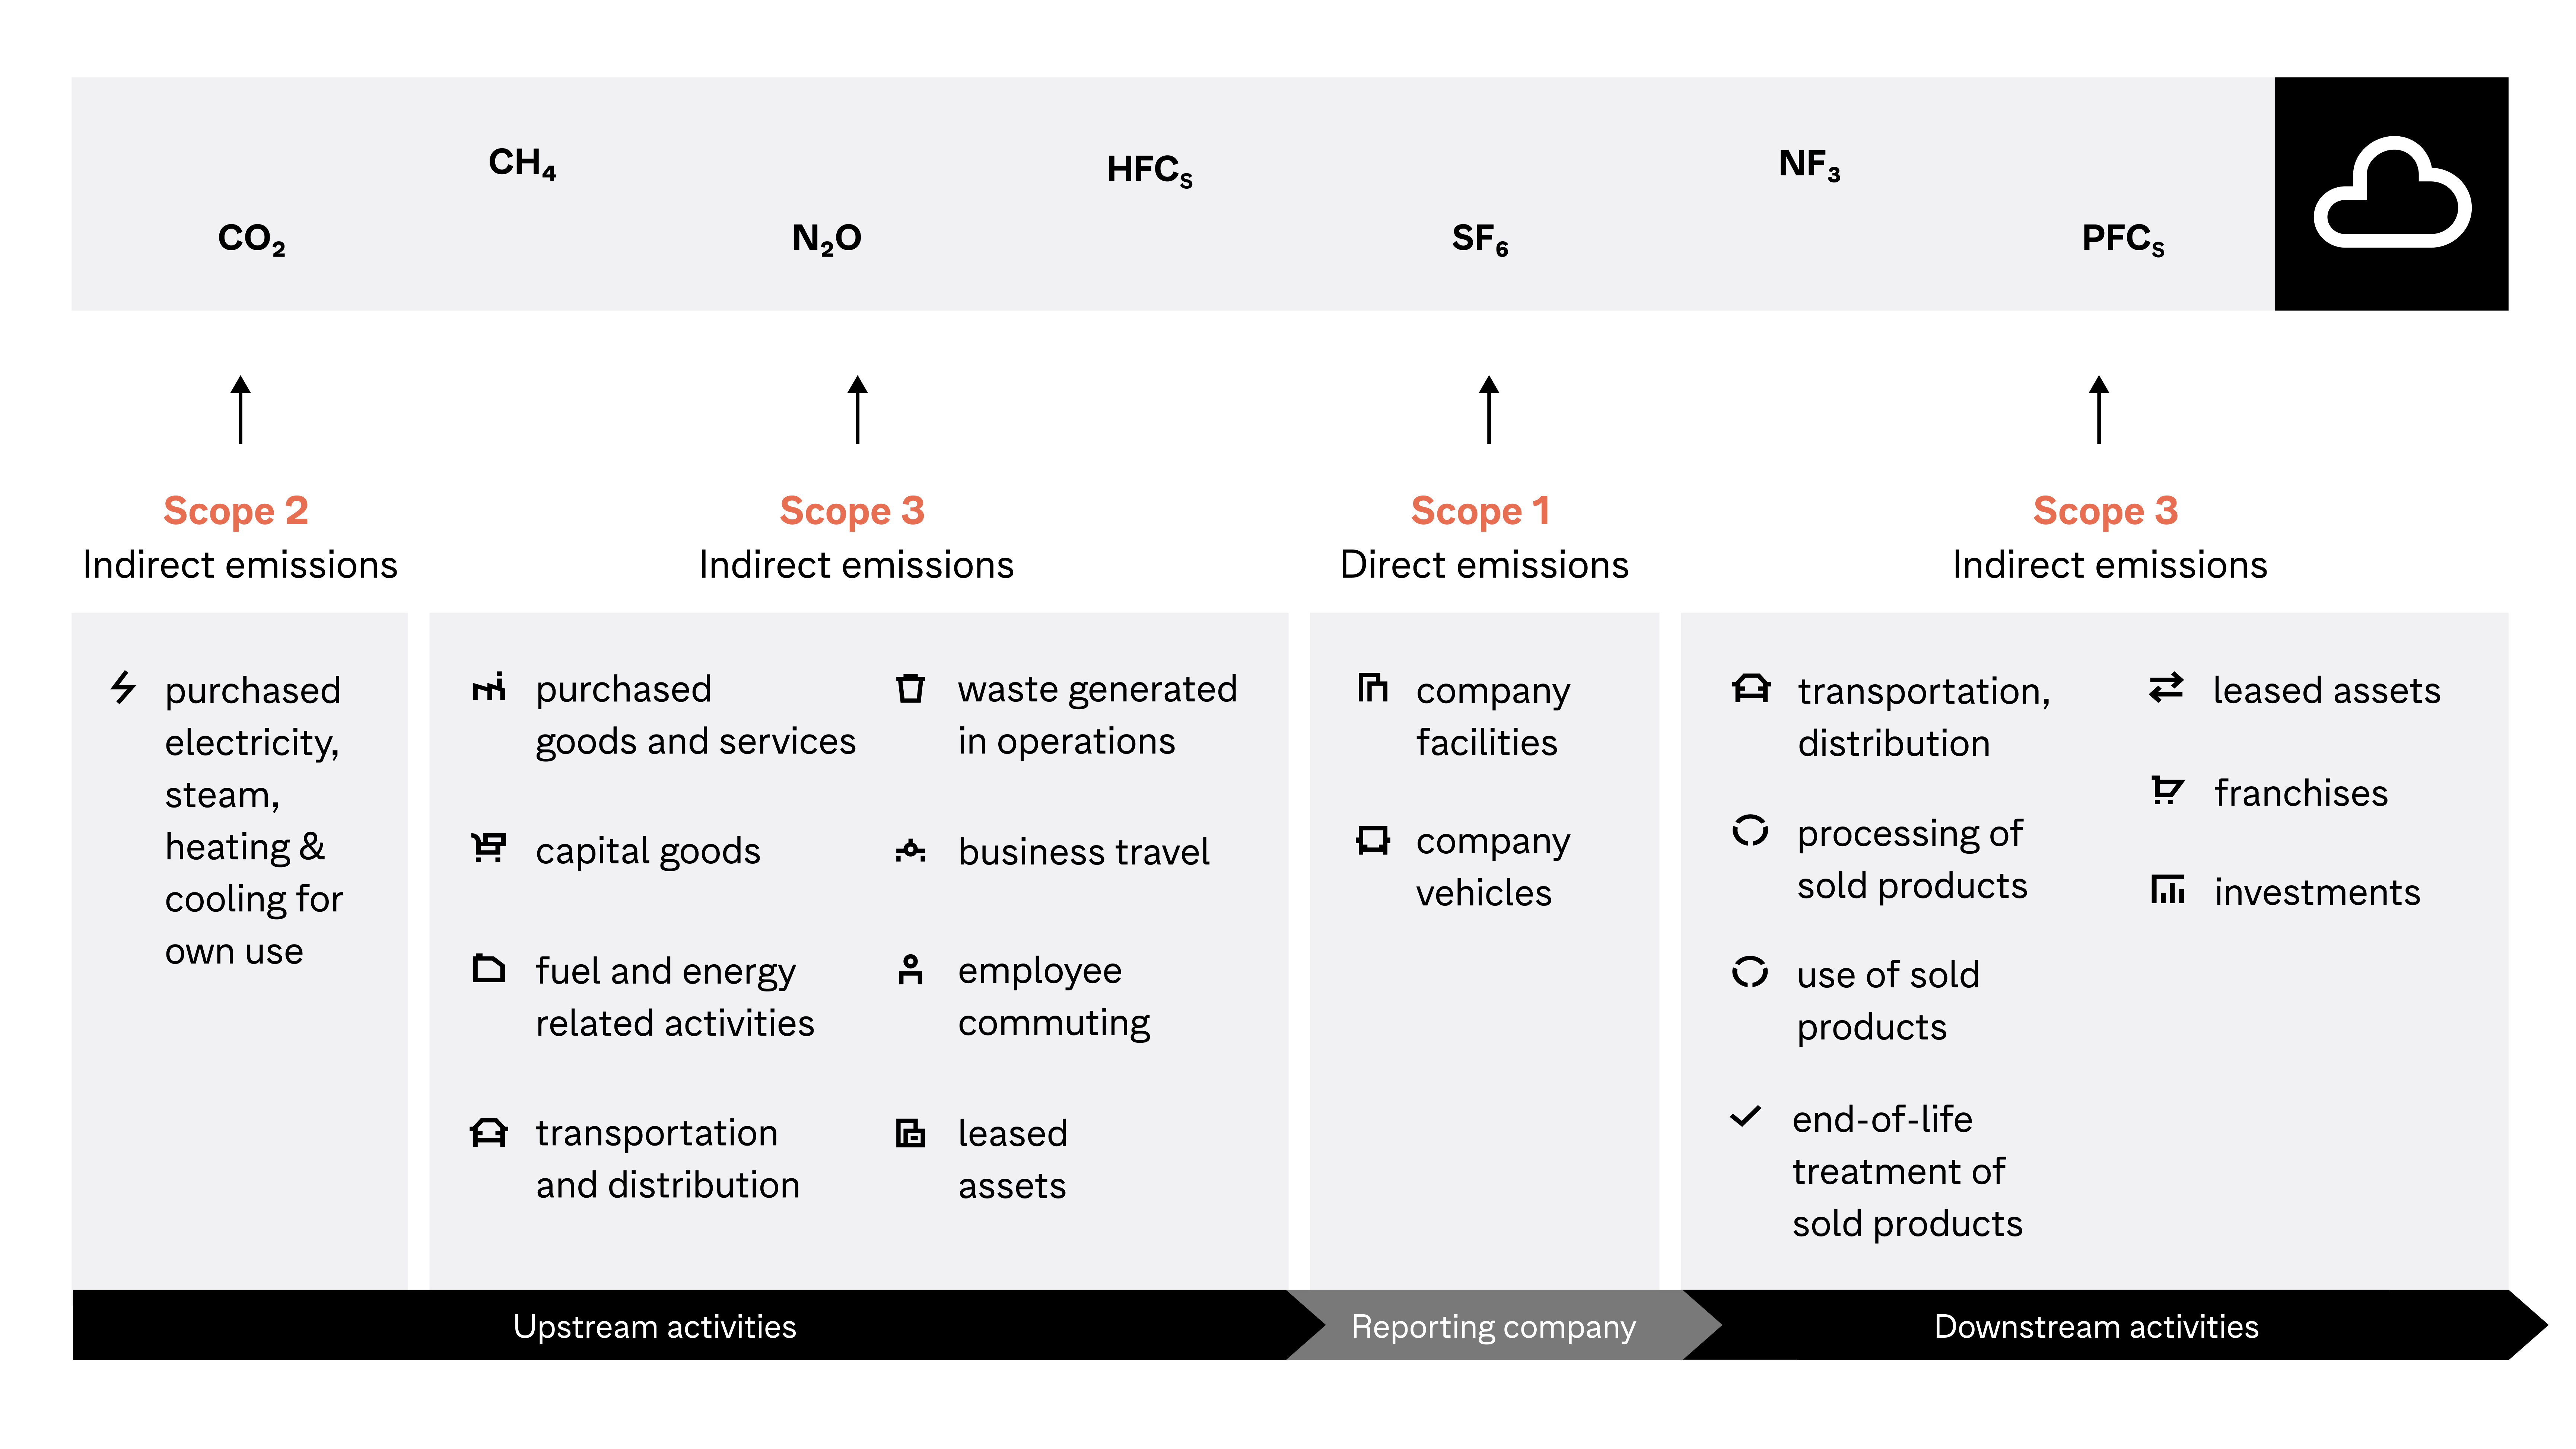 A visual breakdown of emissions scopes 1, 2, and 3